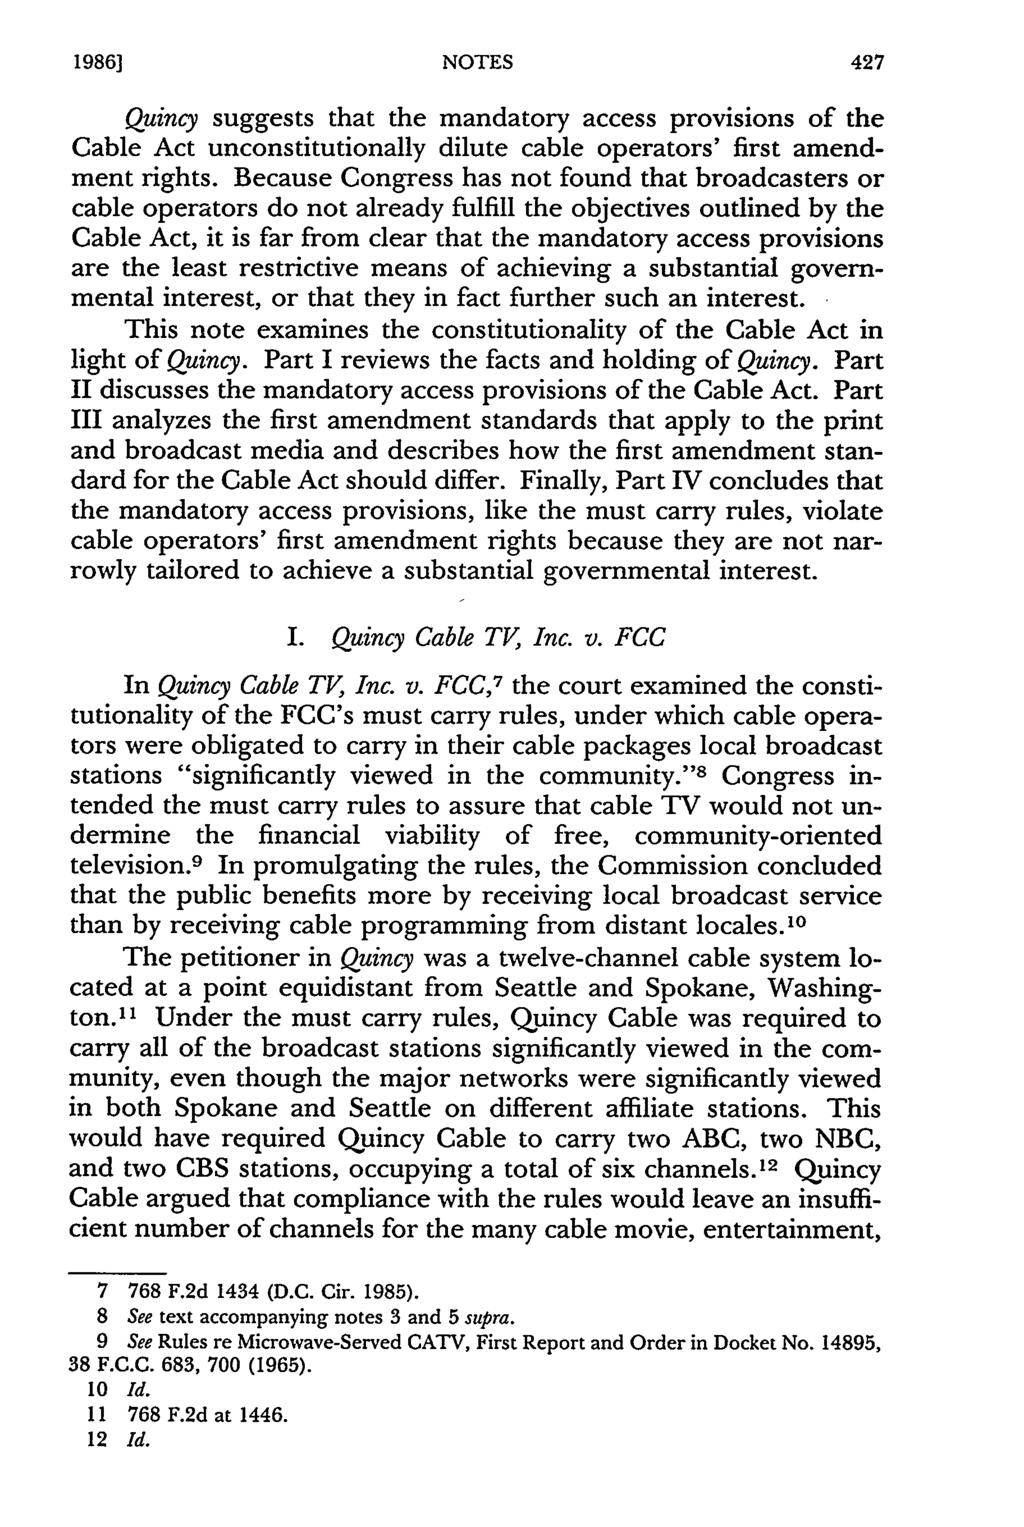 1986] NOTES Quincy suggests that the mandatory access provisions of the Cable Act unconstitutionally dilute cable operators' first amendment rights.